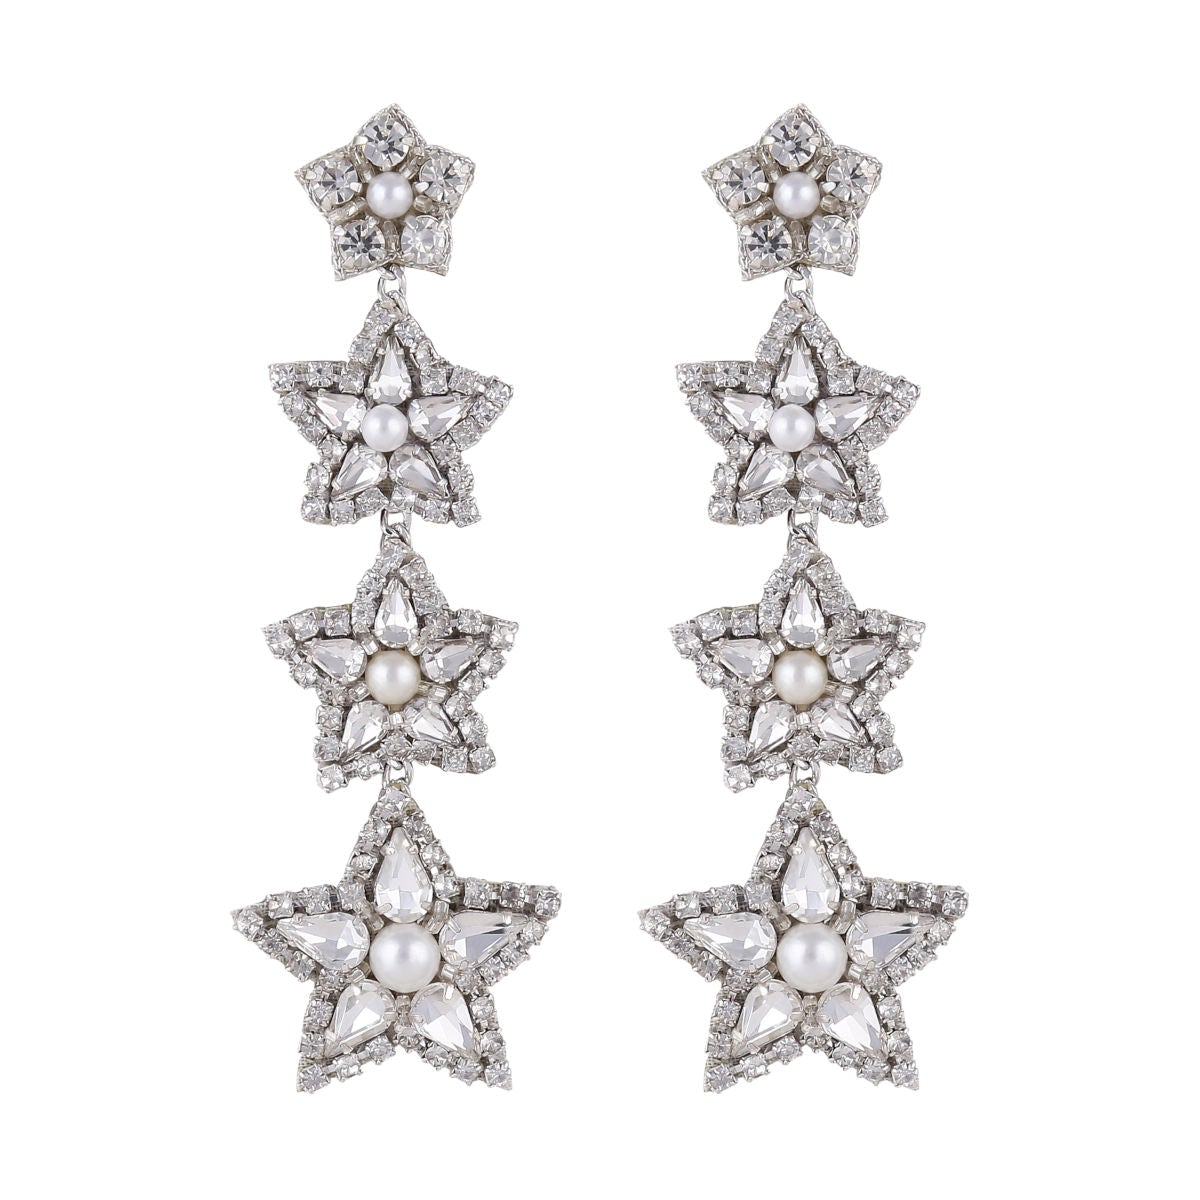 Deepa Gurnani Rea Earrings - Sparkle away with our handmade star crystal earrings! *Cotton *Glass Crystals *Glass Beads *Nickel Free *Vegan Leather Backing *Size: Length 3¼